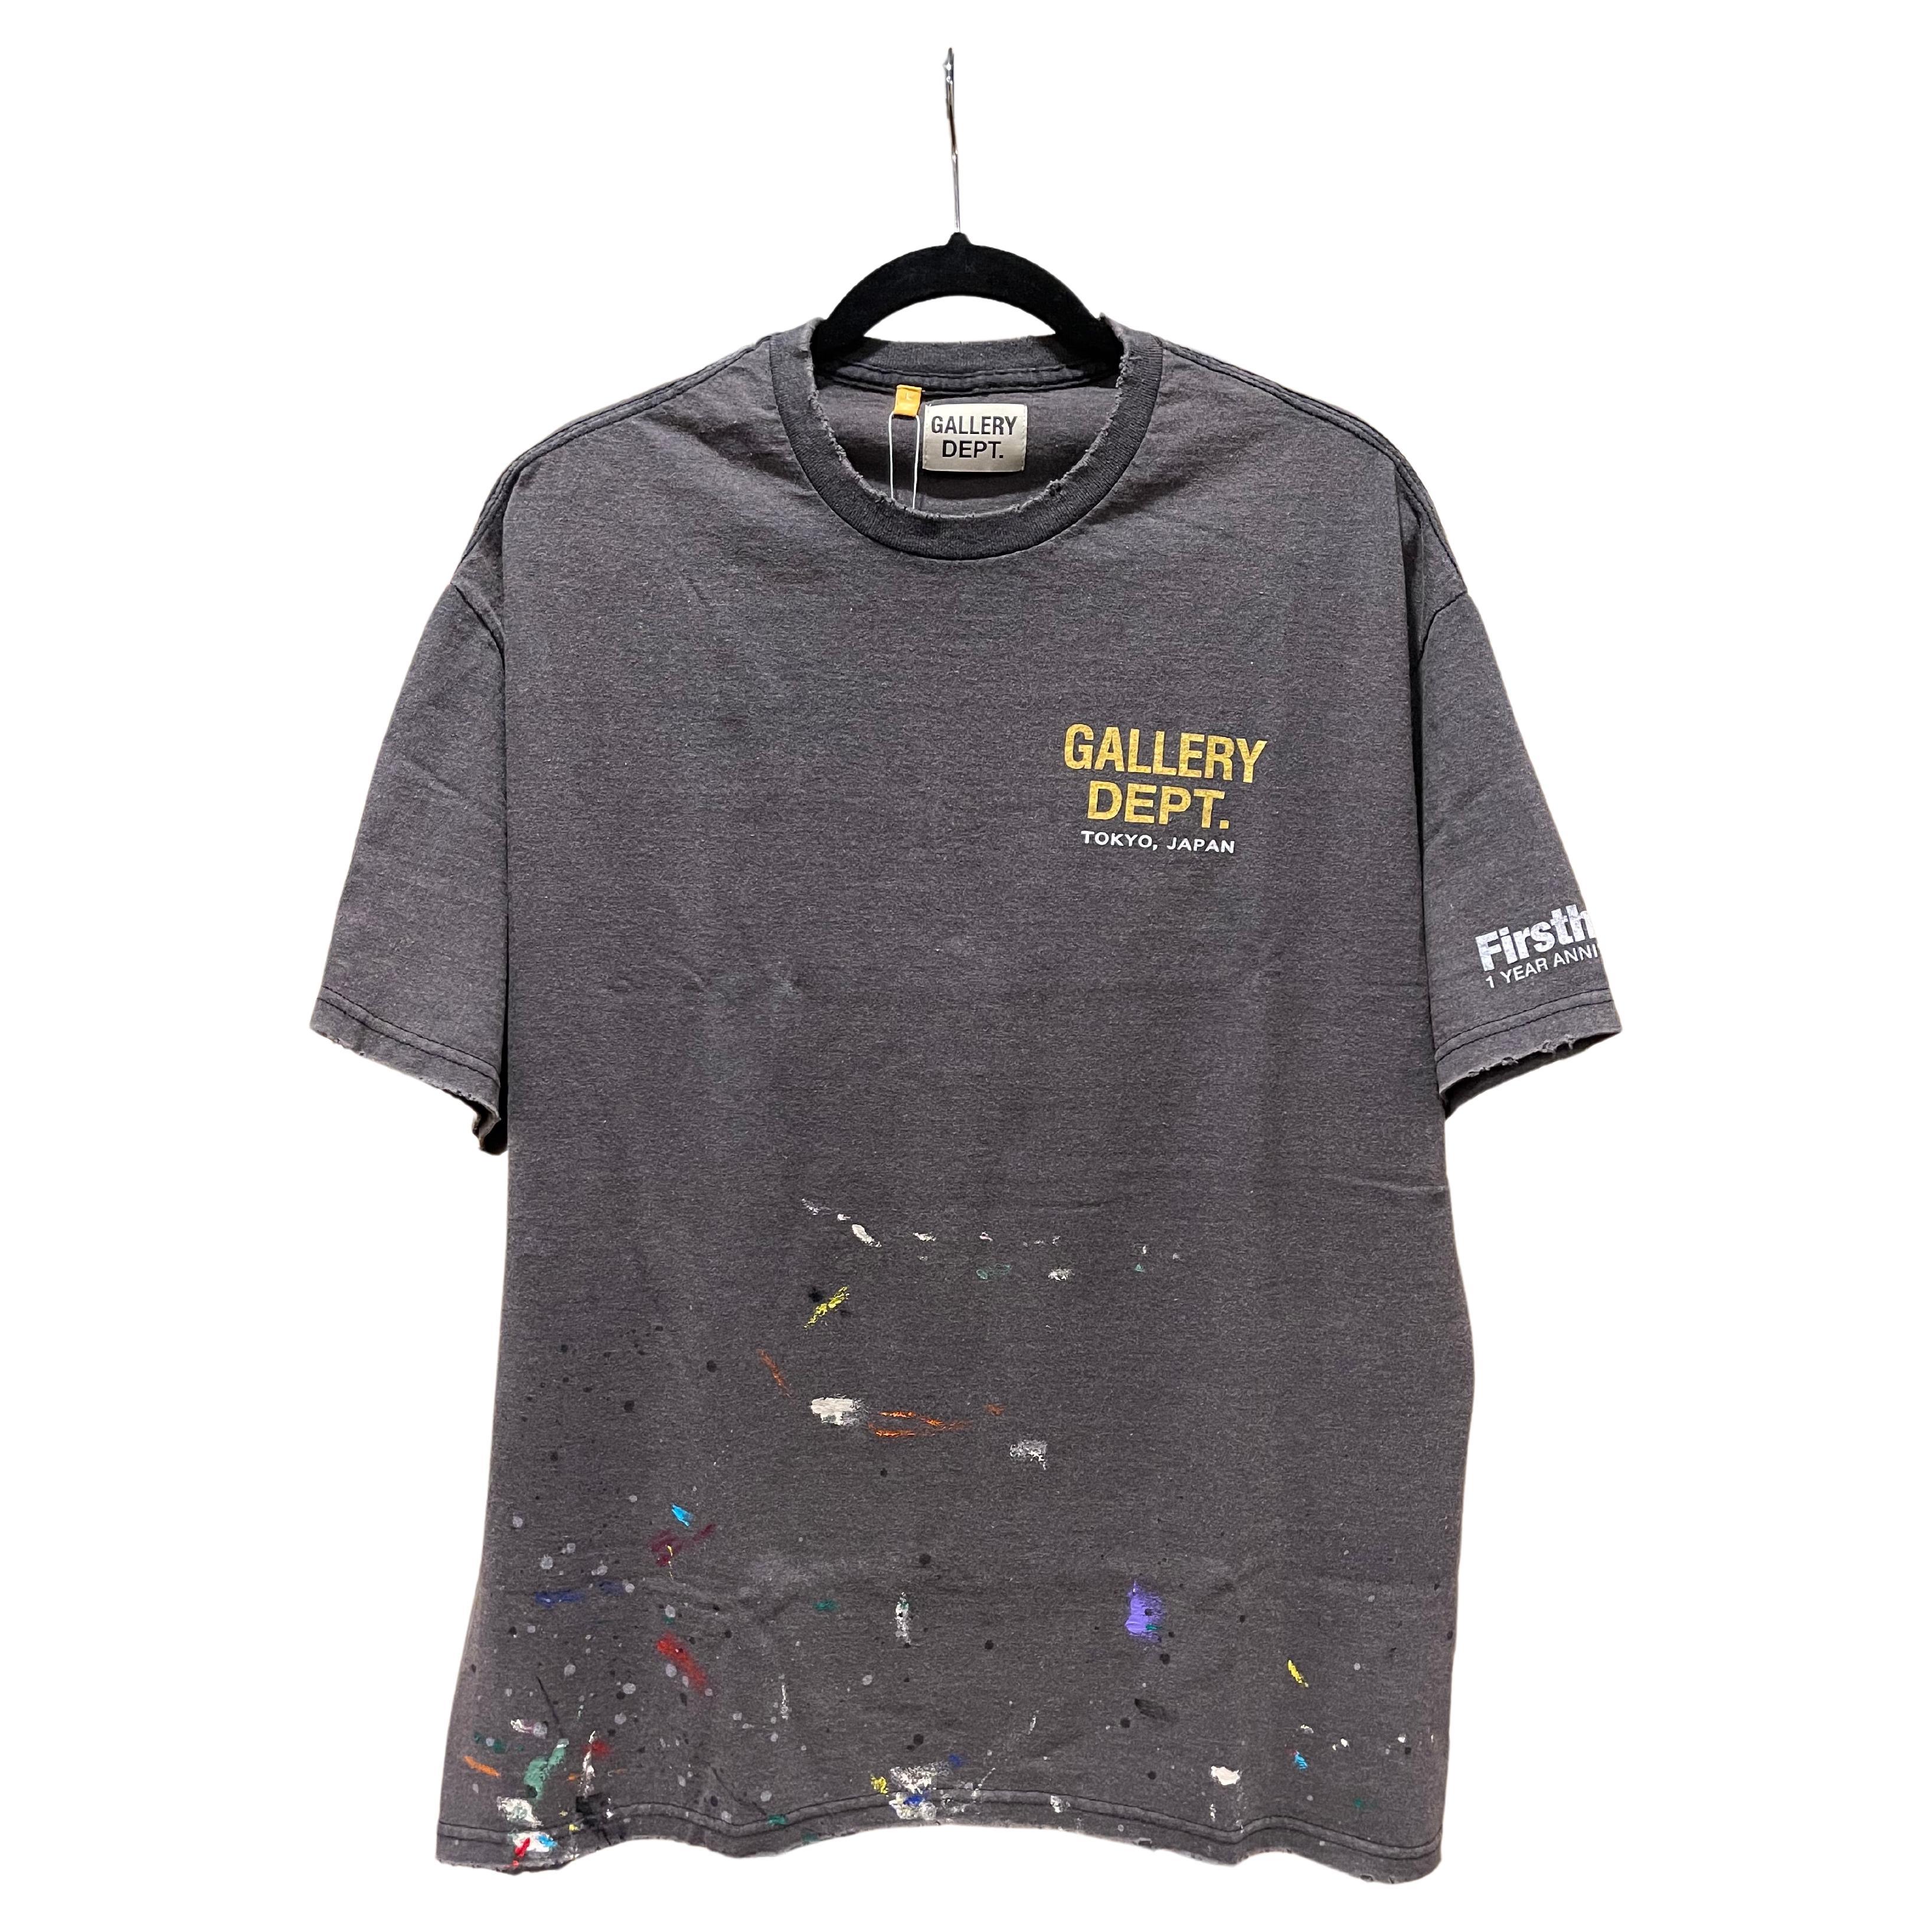 Gallery Dept Tokyo Exclusive Anniversary Painted Brown Tee size Large For Sale